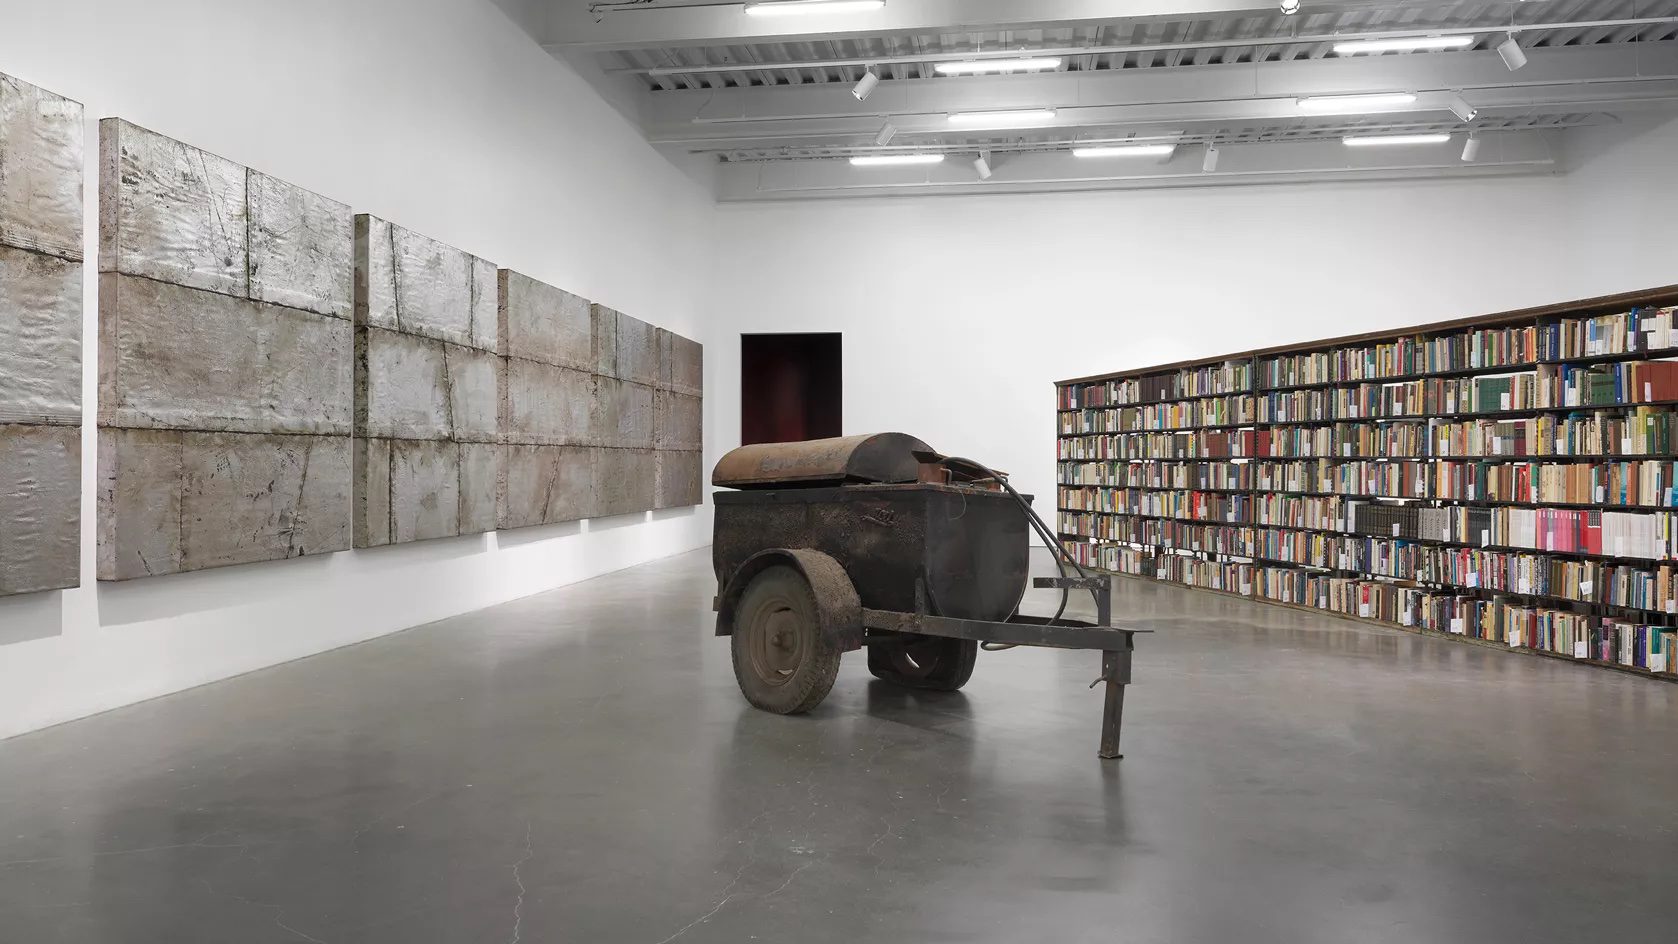 THEASTER GATES: YOUNG LORDS AND THEIR TRACES